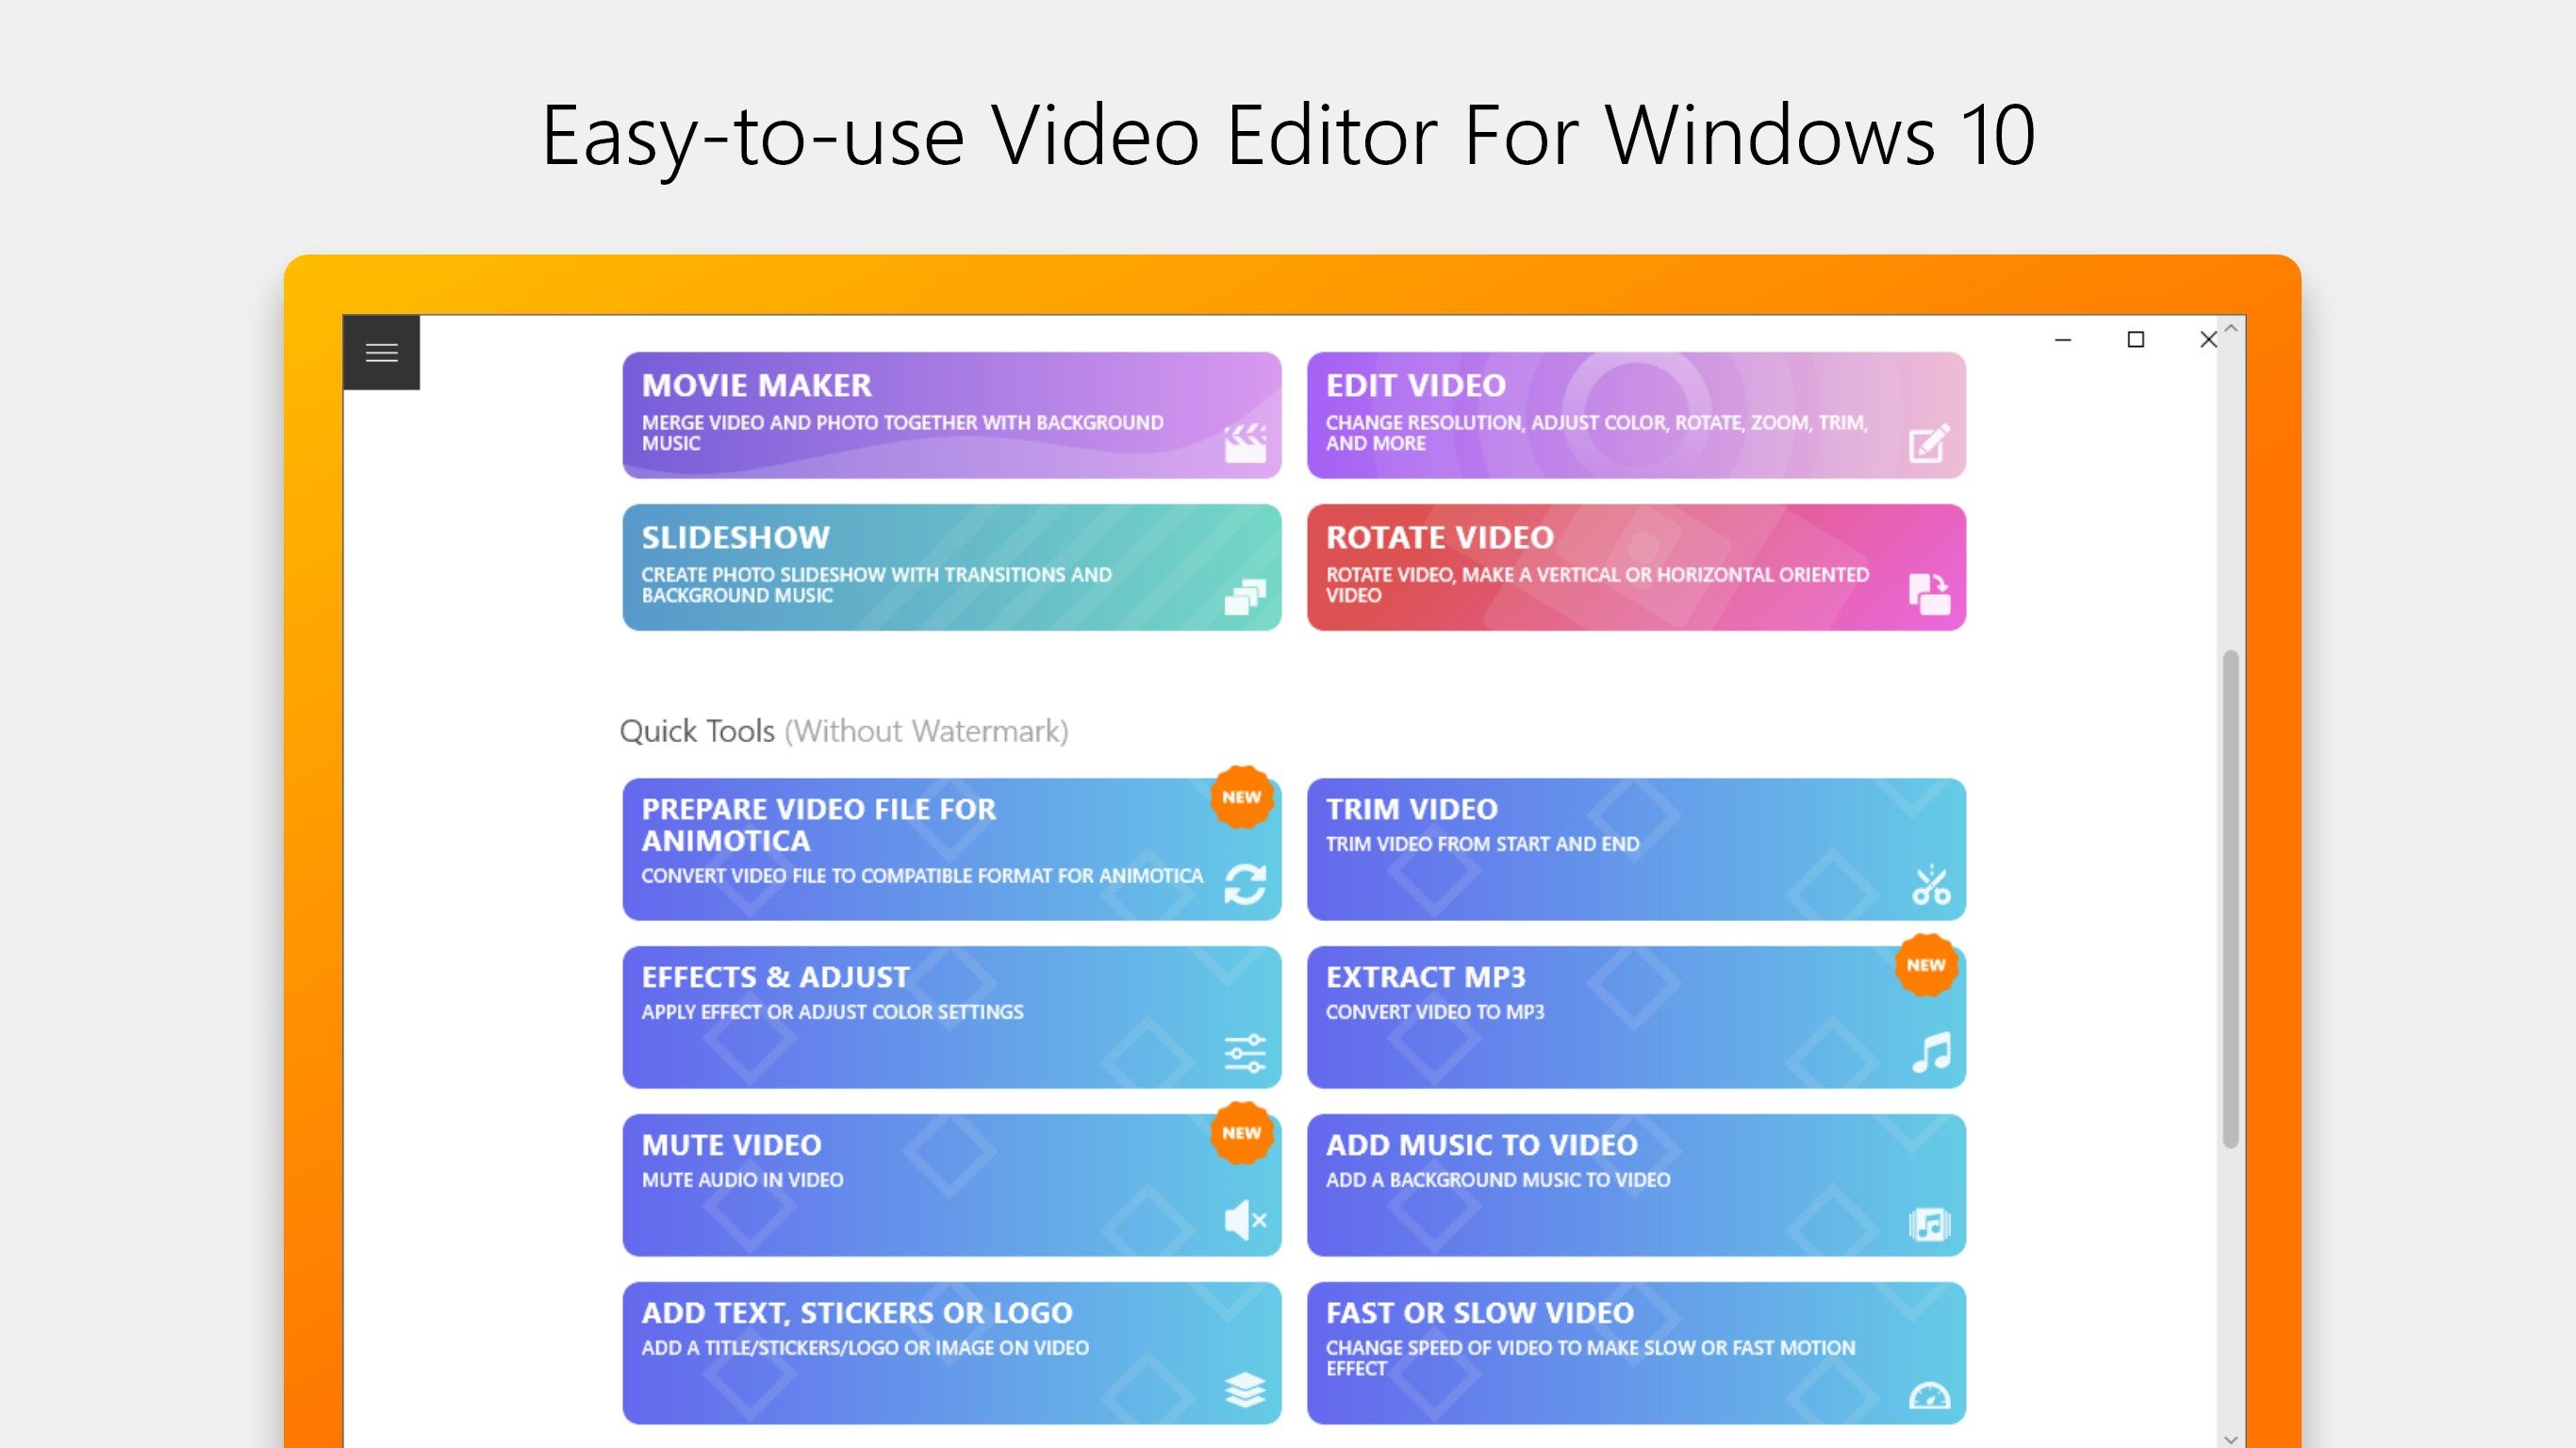 Animotica is an easy-to-use video editor for Windows 10